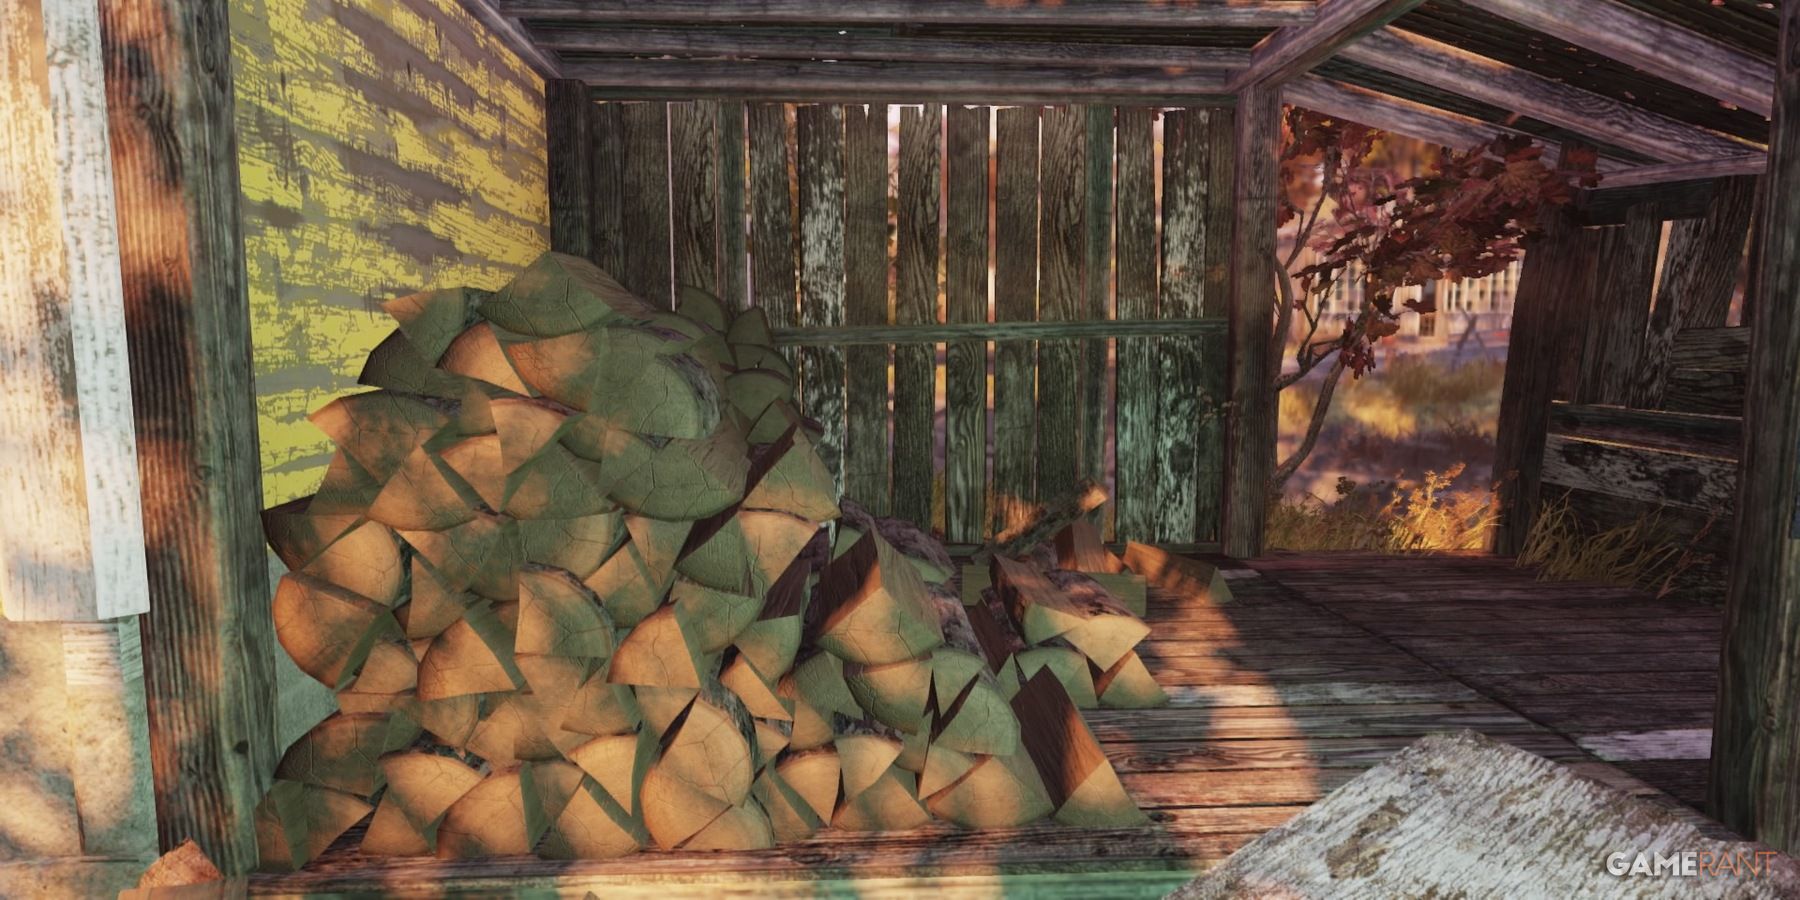 Wood Piles in Fallout 76